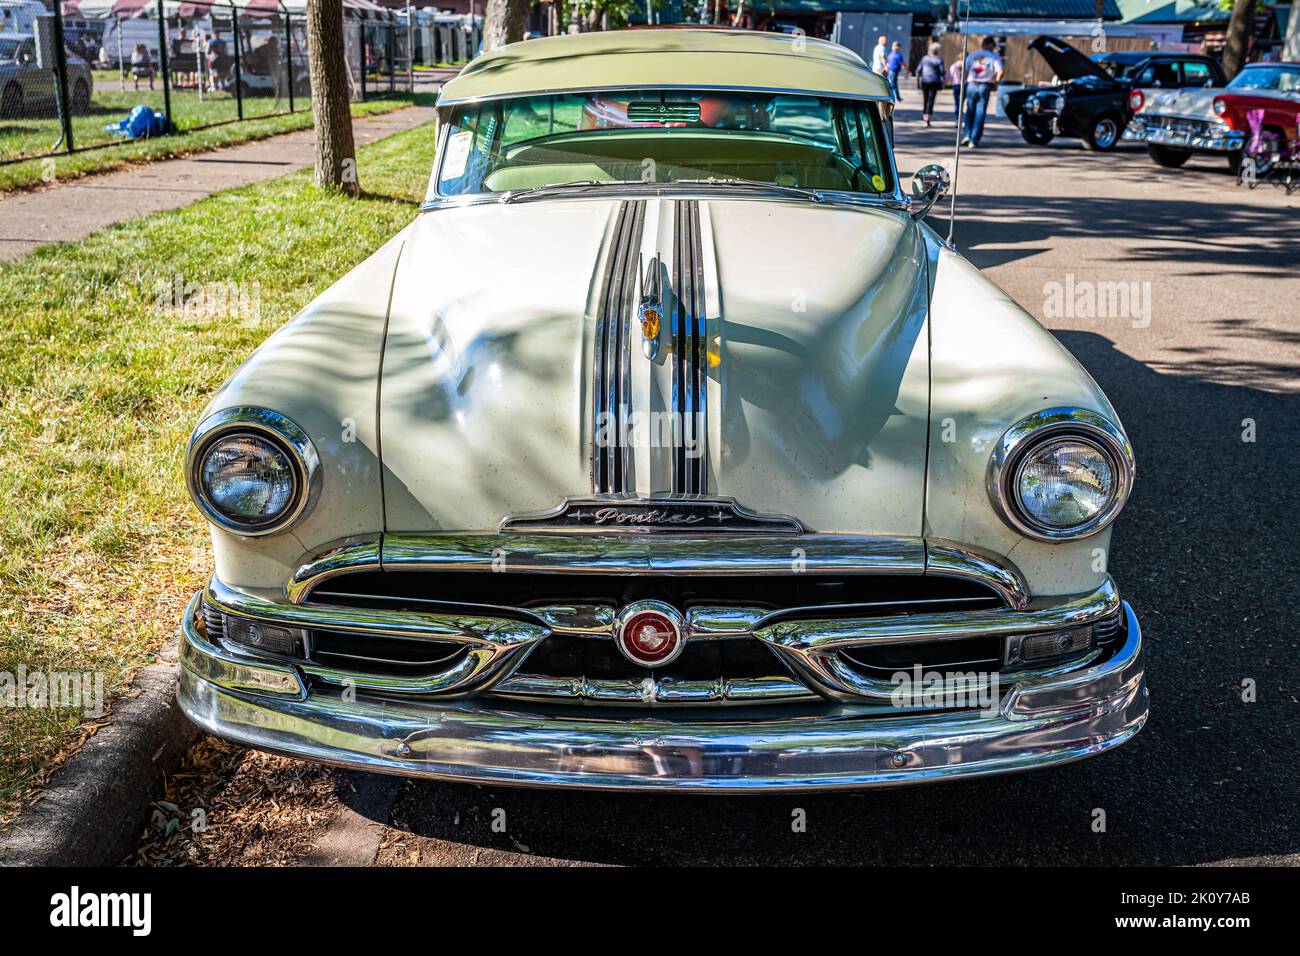 Falcon Heights, MN - June 18, 2022: High perspective front view of a 1953 Pontiac Chieftain 2 Door Sedan at a local car show. Stock Photo